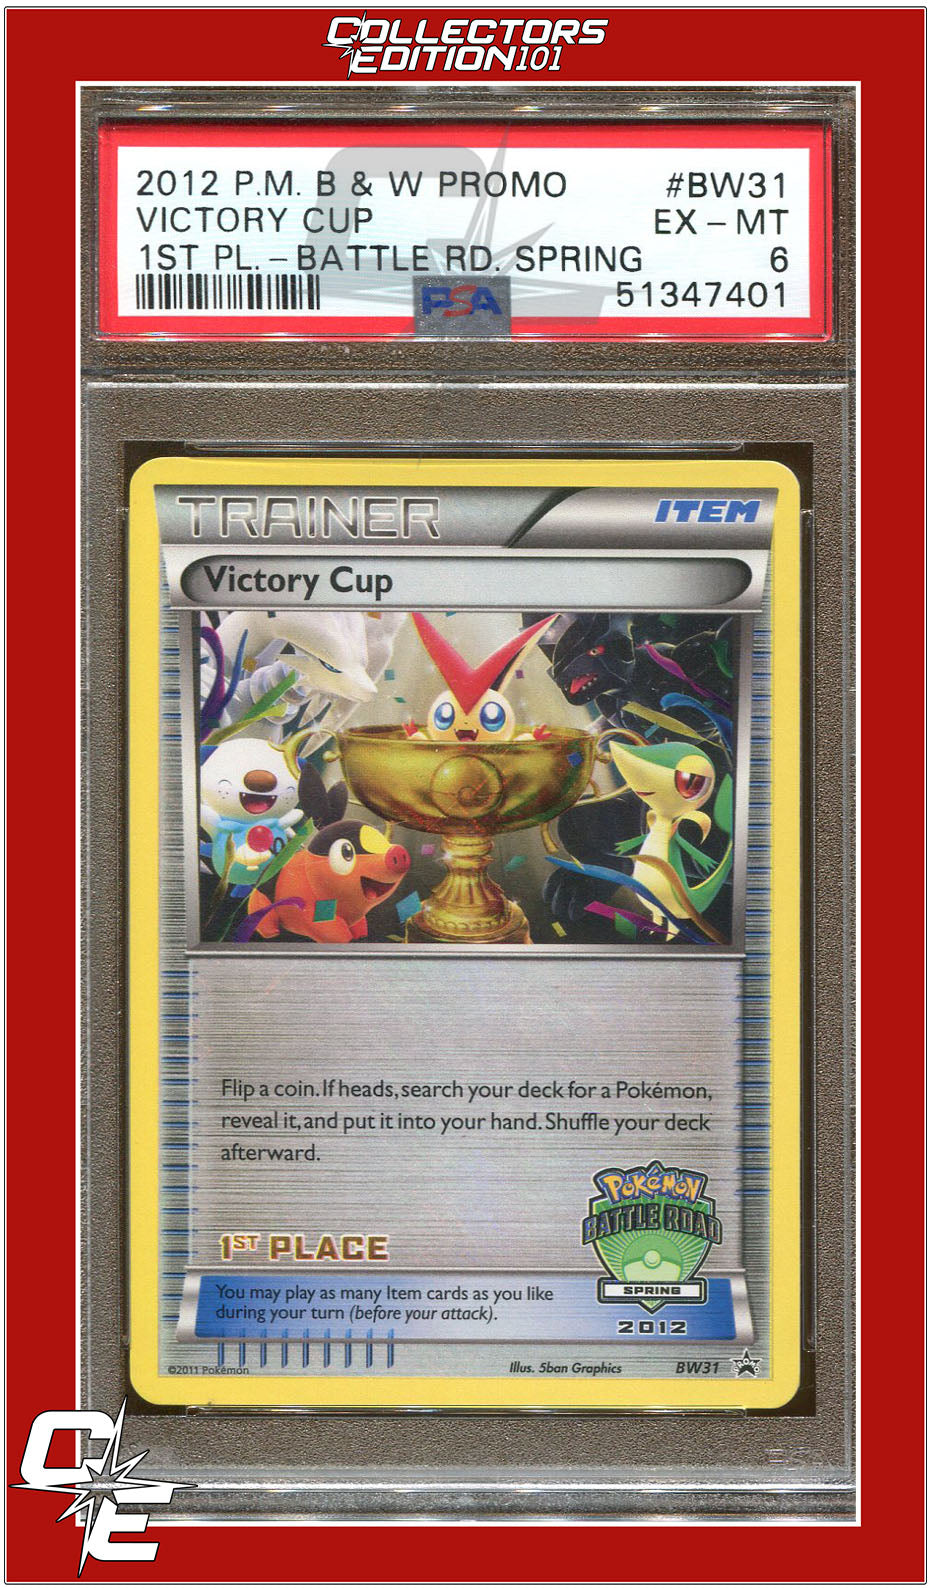 BW Black Star Promo BW31 Victory Cup 1st Place 2012 Battle Road Spring PSA 6